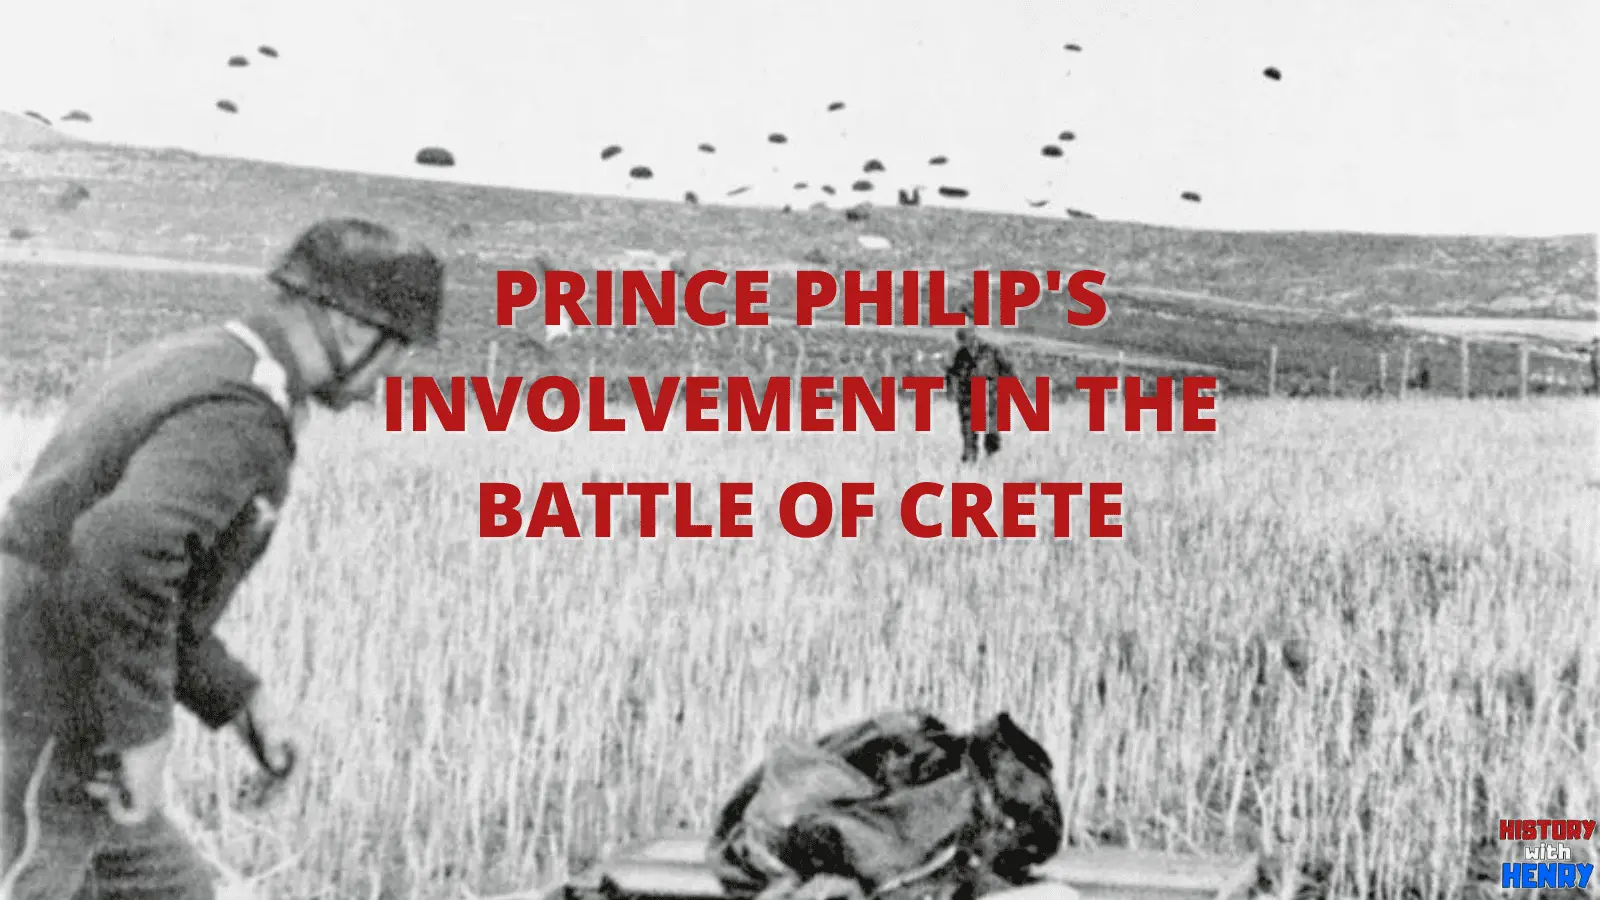 What did Prince Philip do during the second world war?